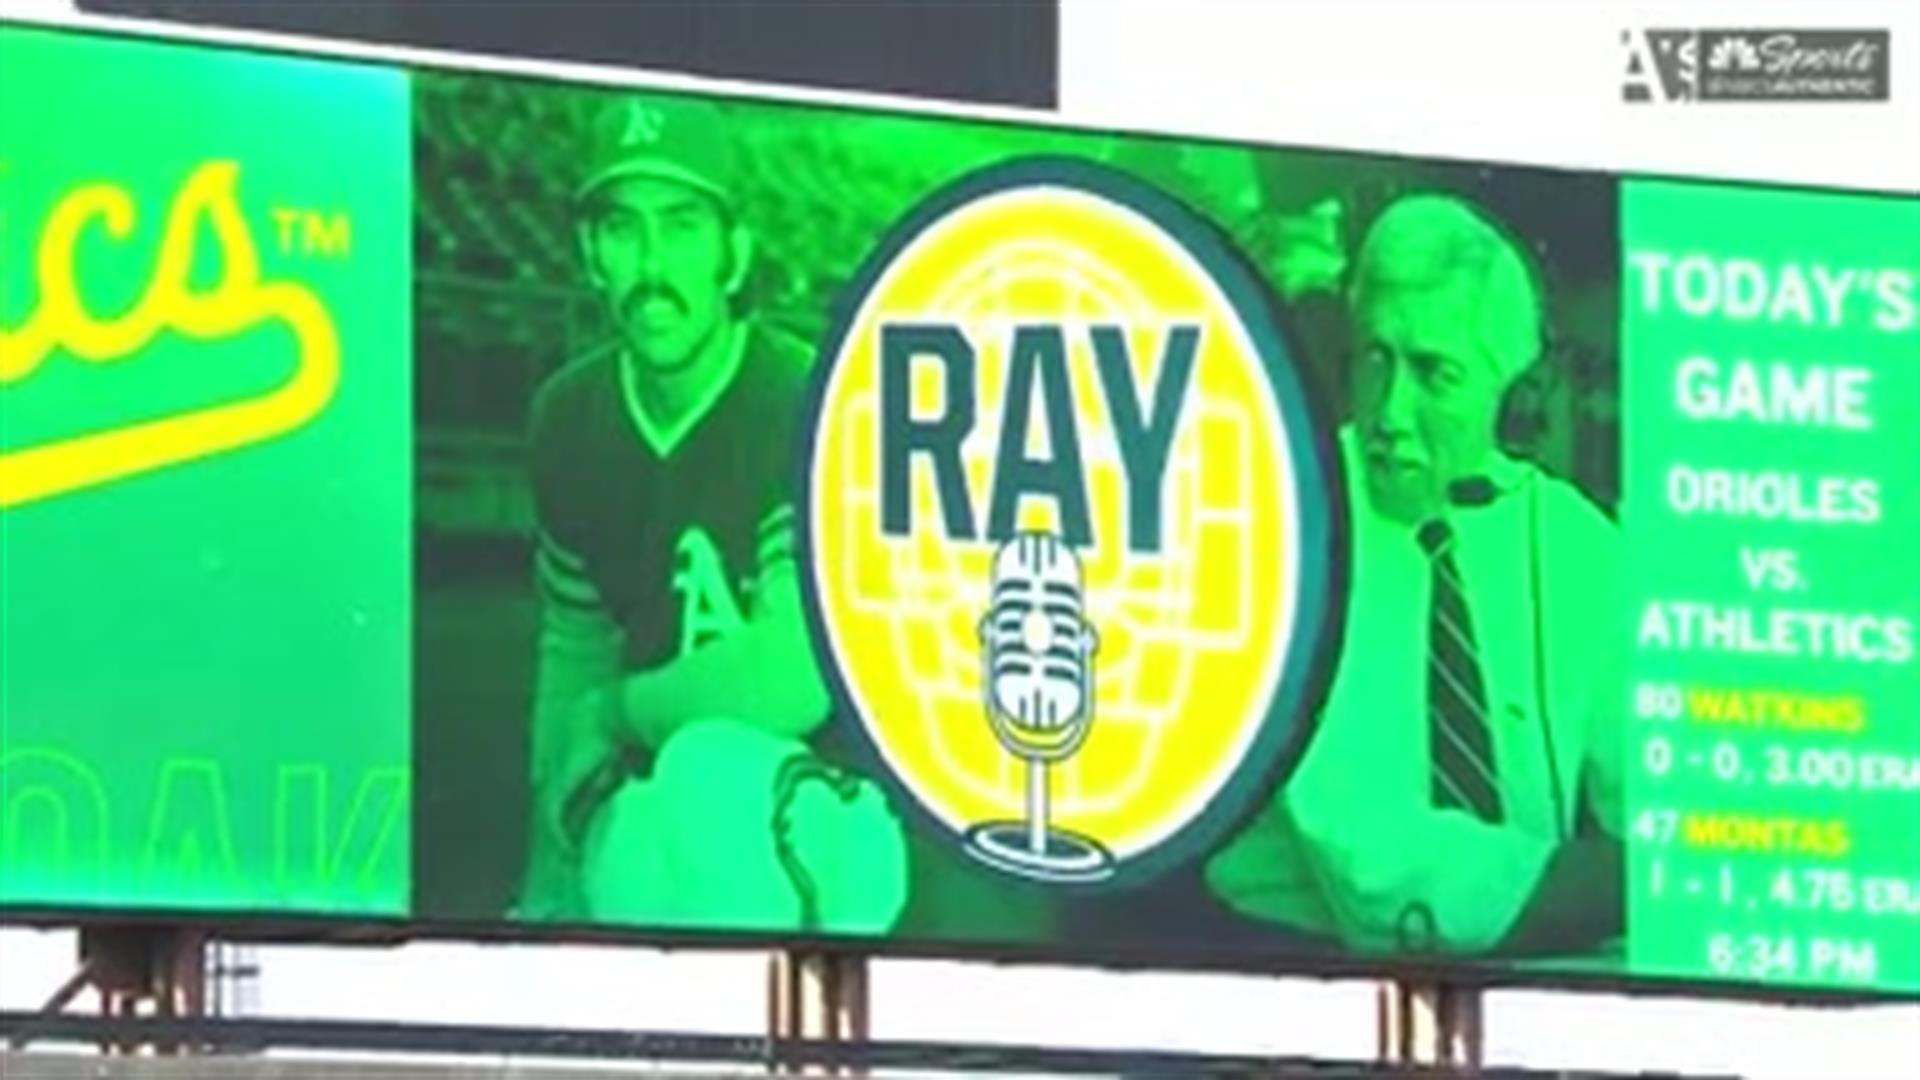 A's unveil jersey patch honoring Ray Fosse